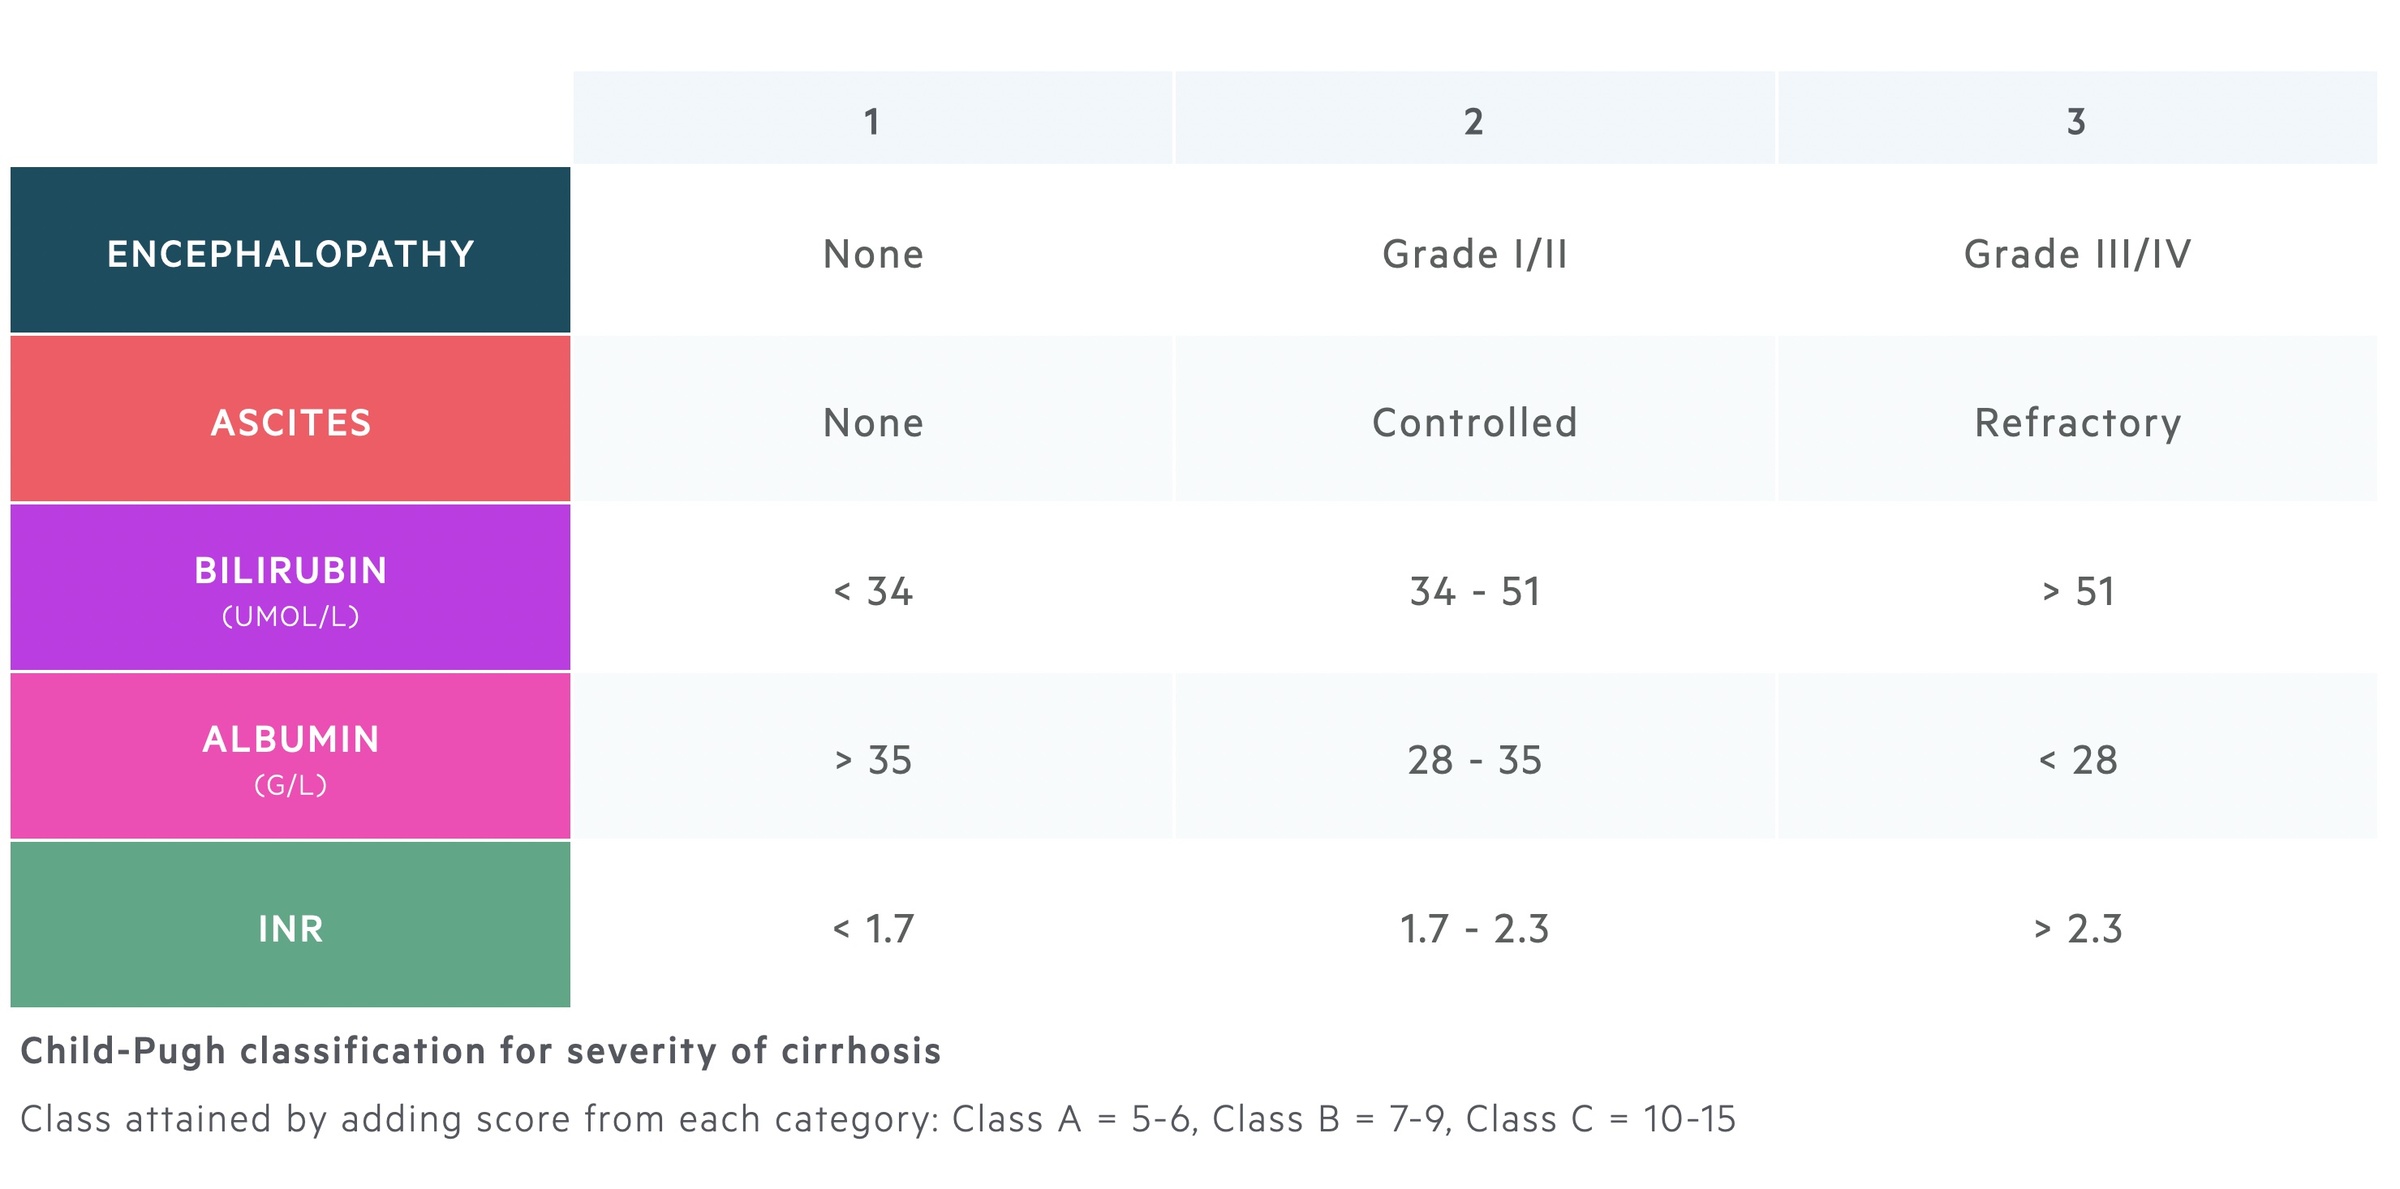 Child-Pugh classification for severity of cirrhosis